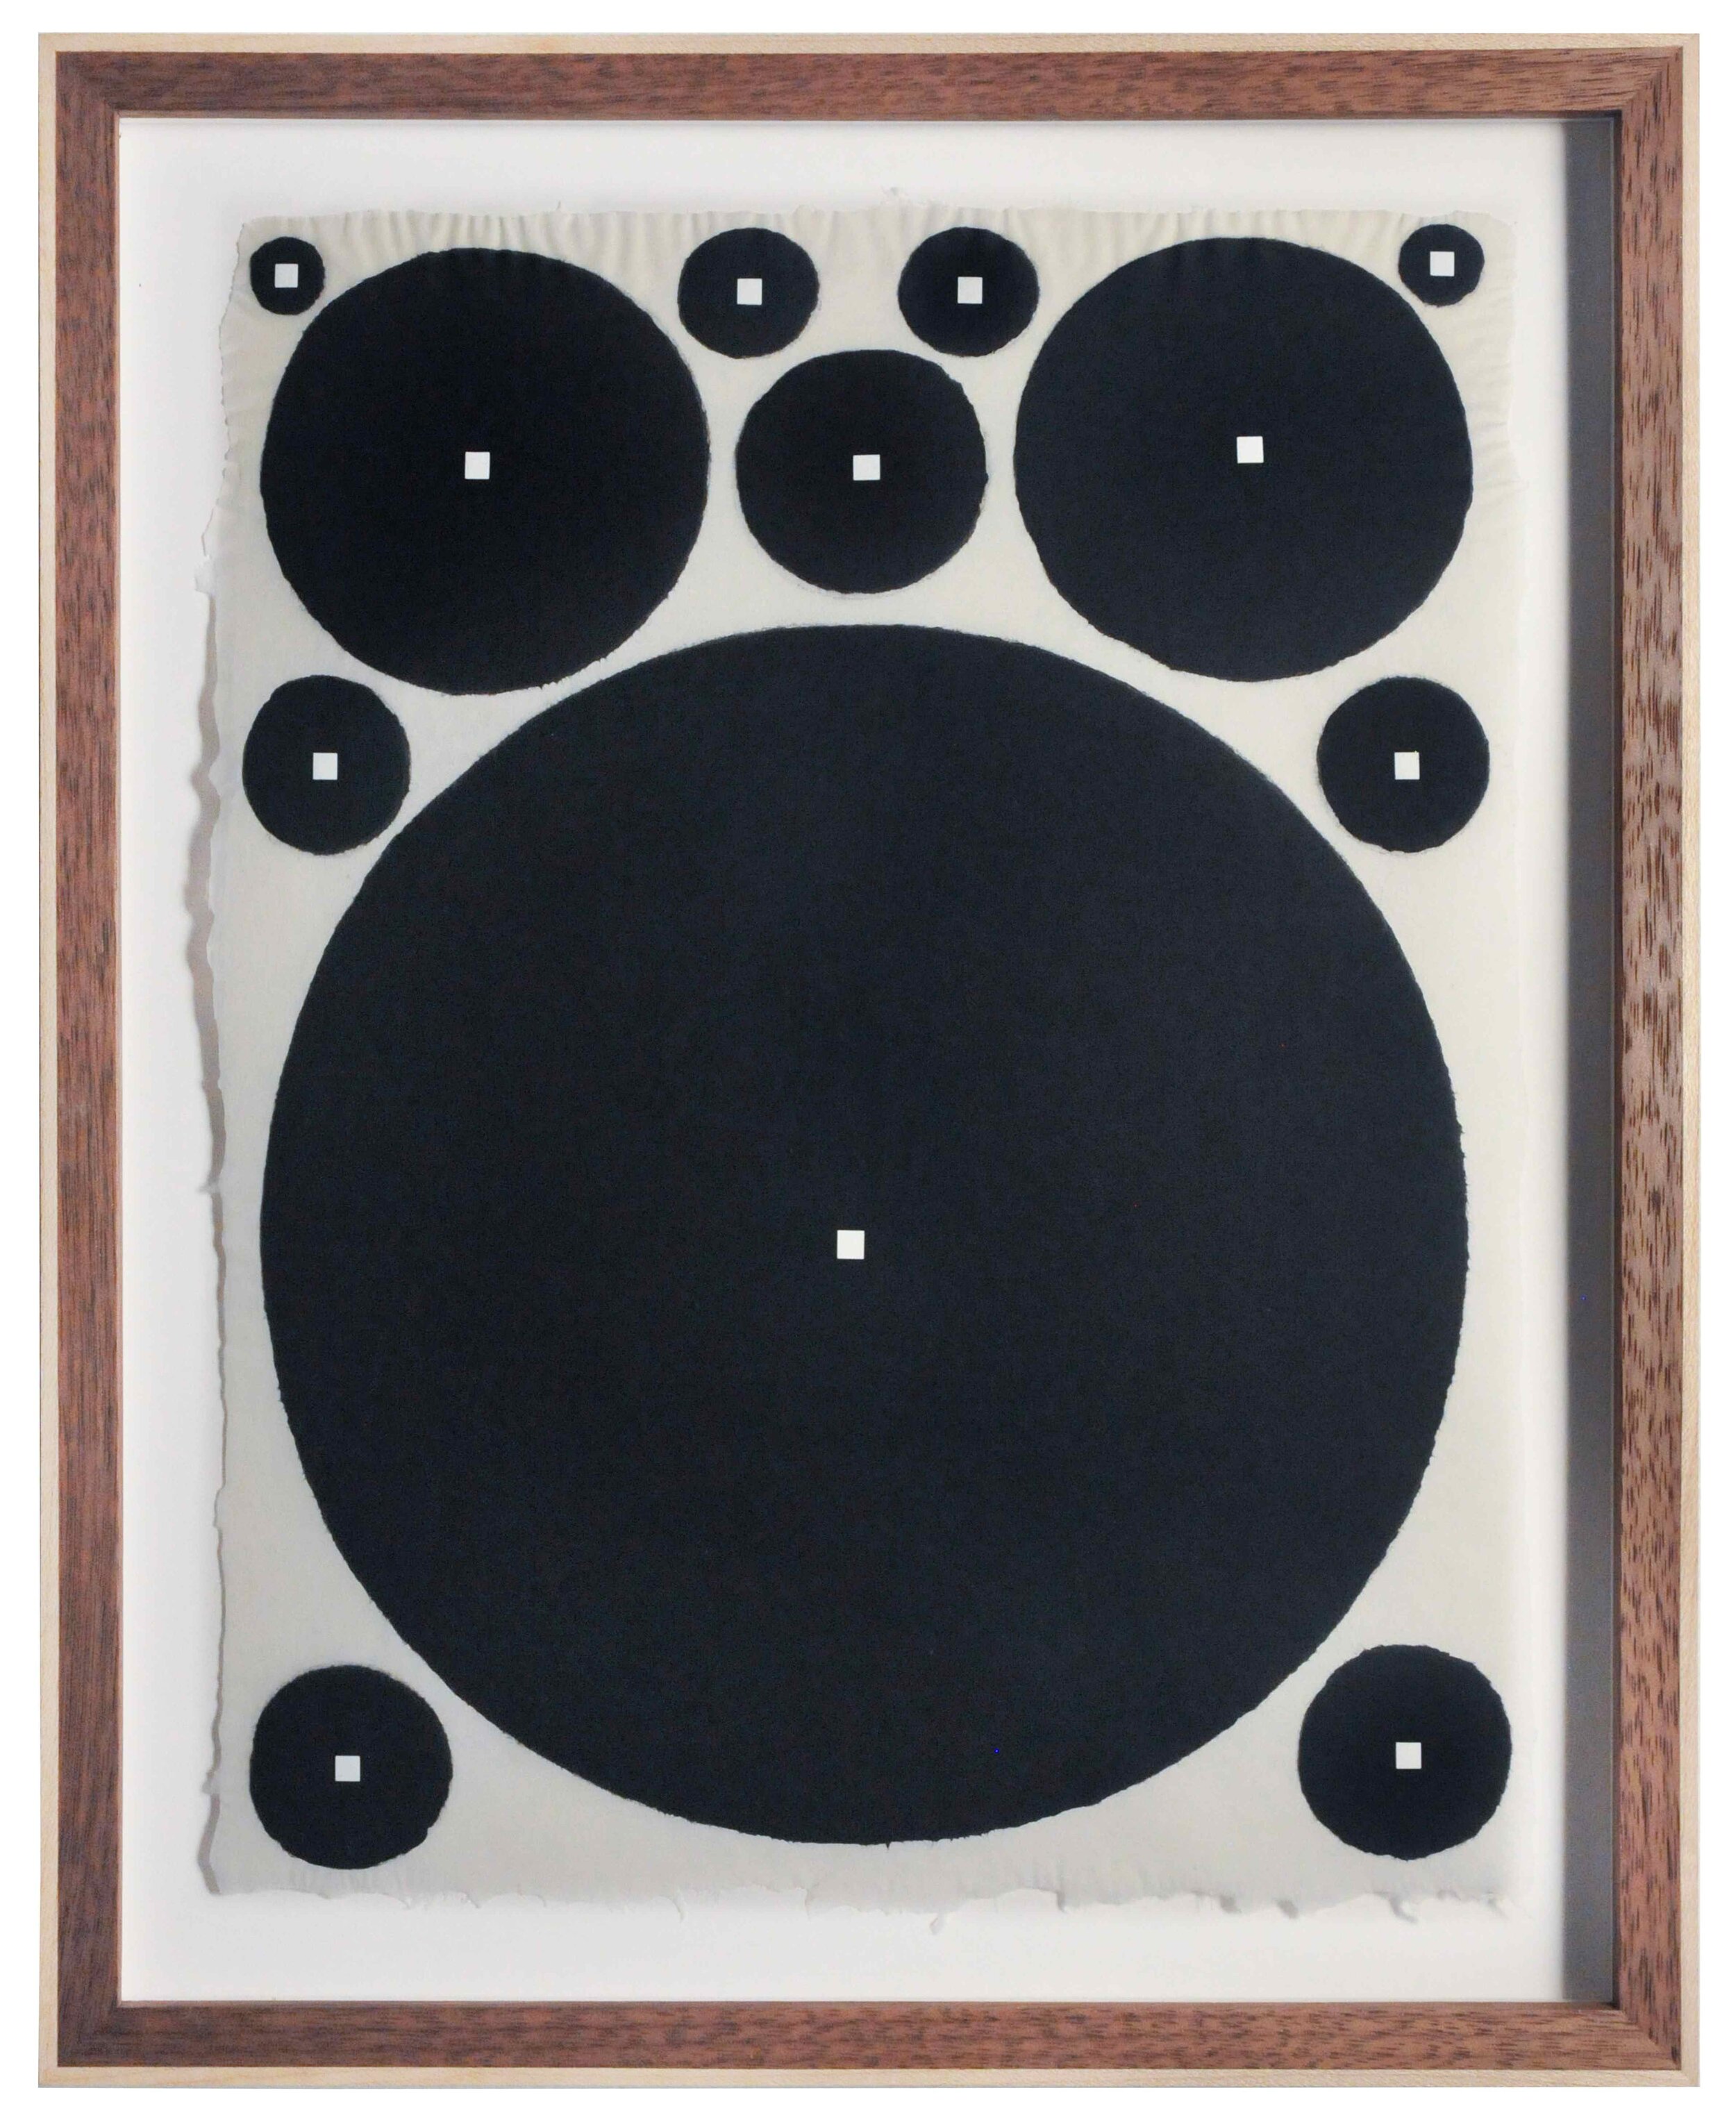  James Siena,  Twelve Circles, Twelve Squares (Black-White),  2012, Pigmented linen pulp on cotton base sheet in frame designed by artist, 11 x 8.5 inches.  